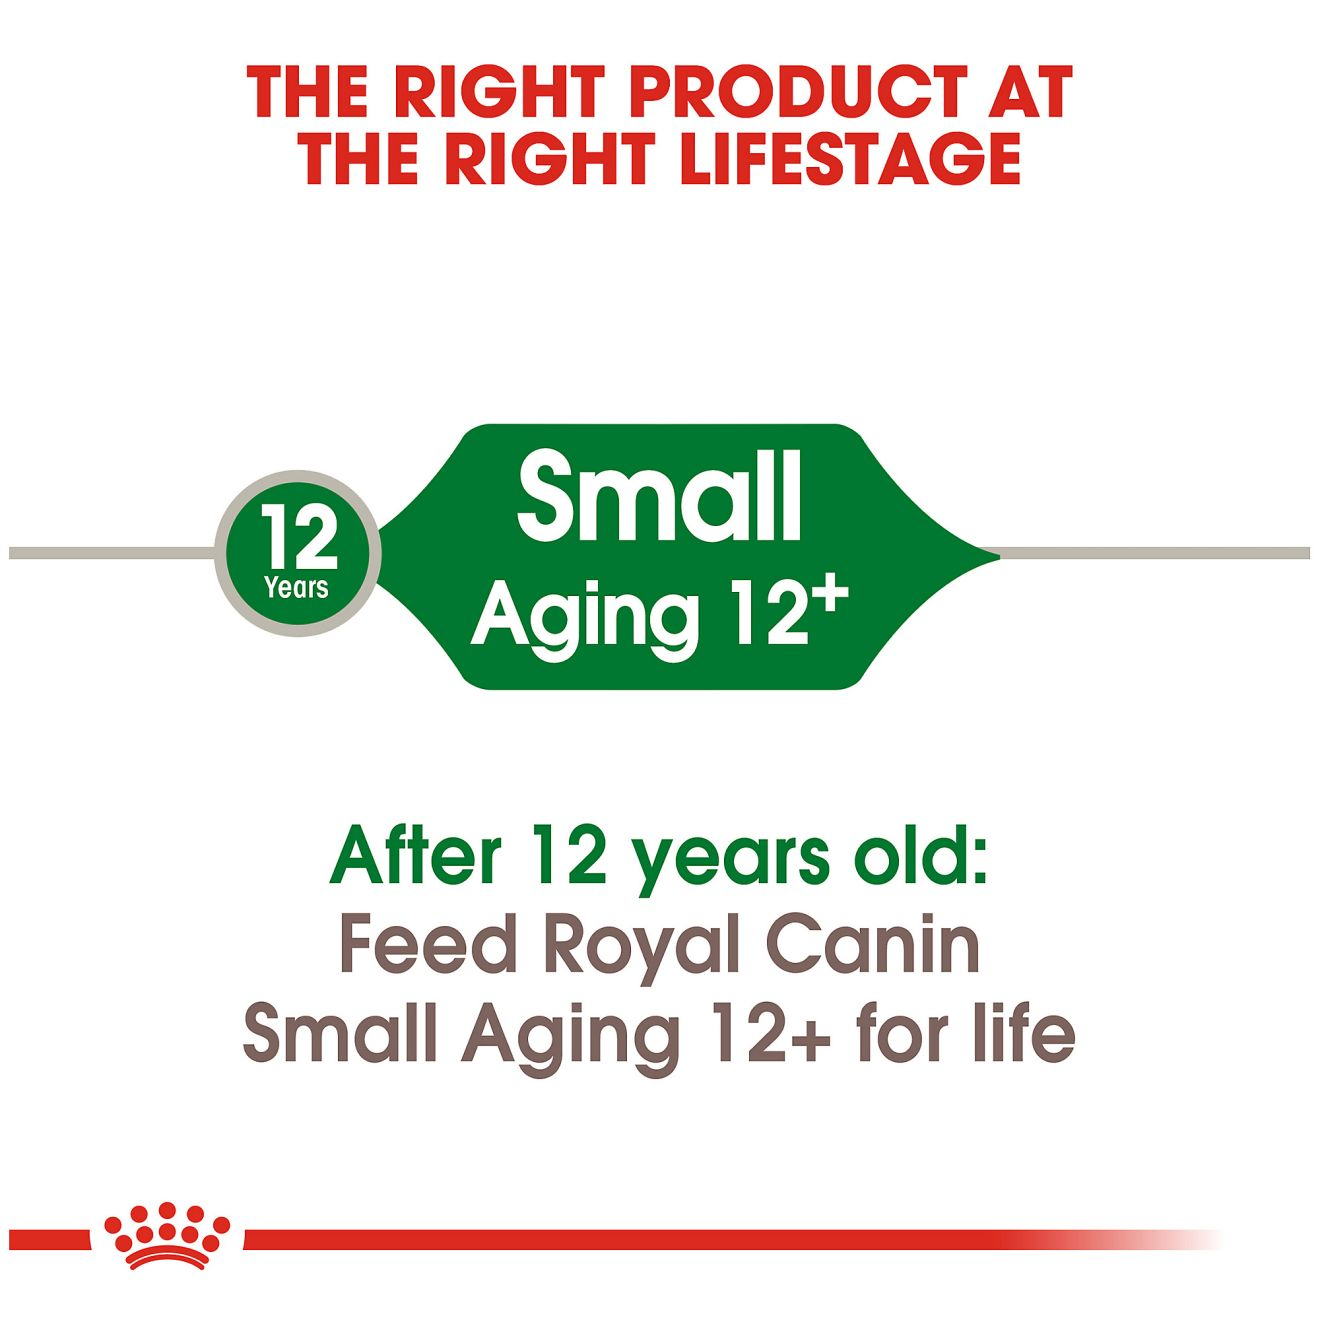 Small Aging 12+